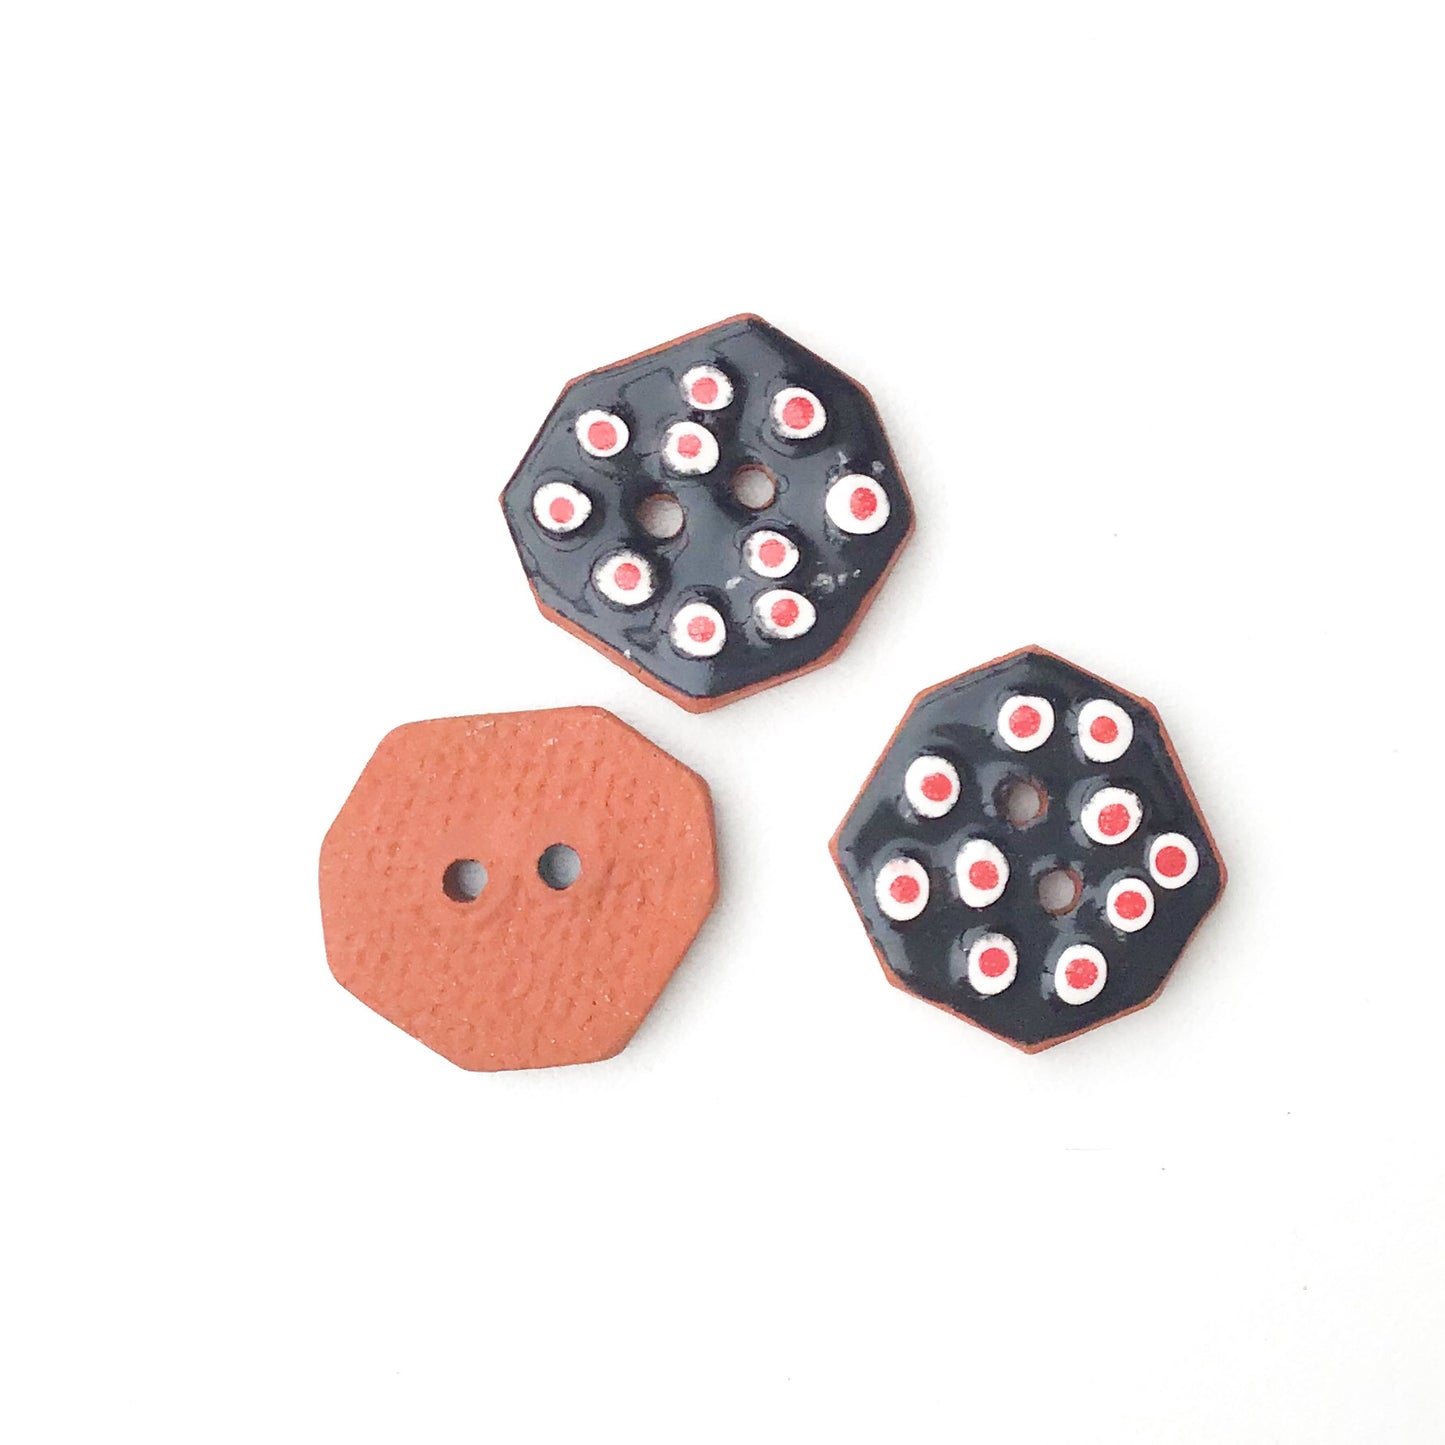 Geometric Buttons - Black with Red & White Dots - 5/8" x 3/4" - 3 Pack